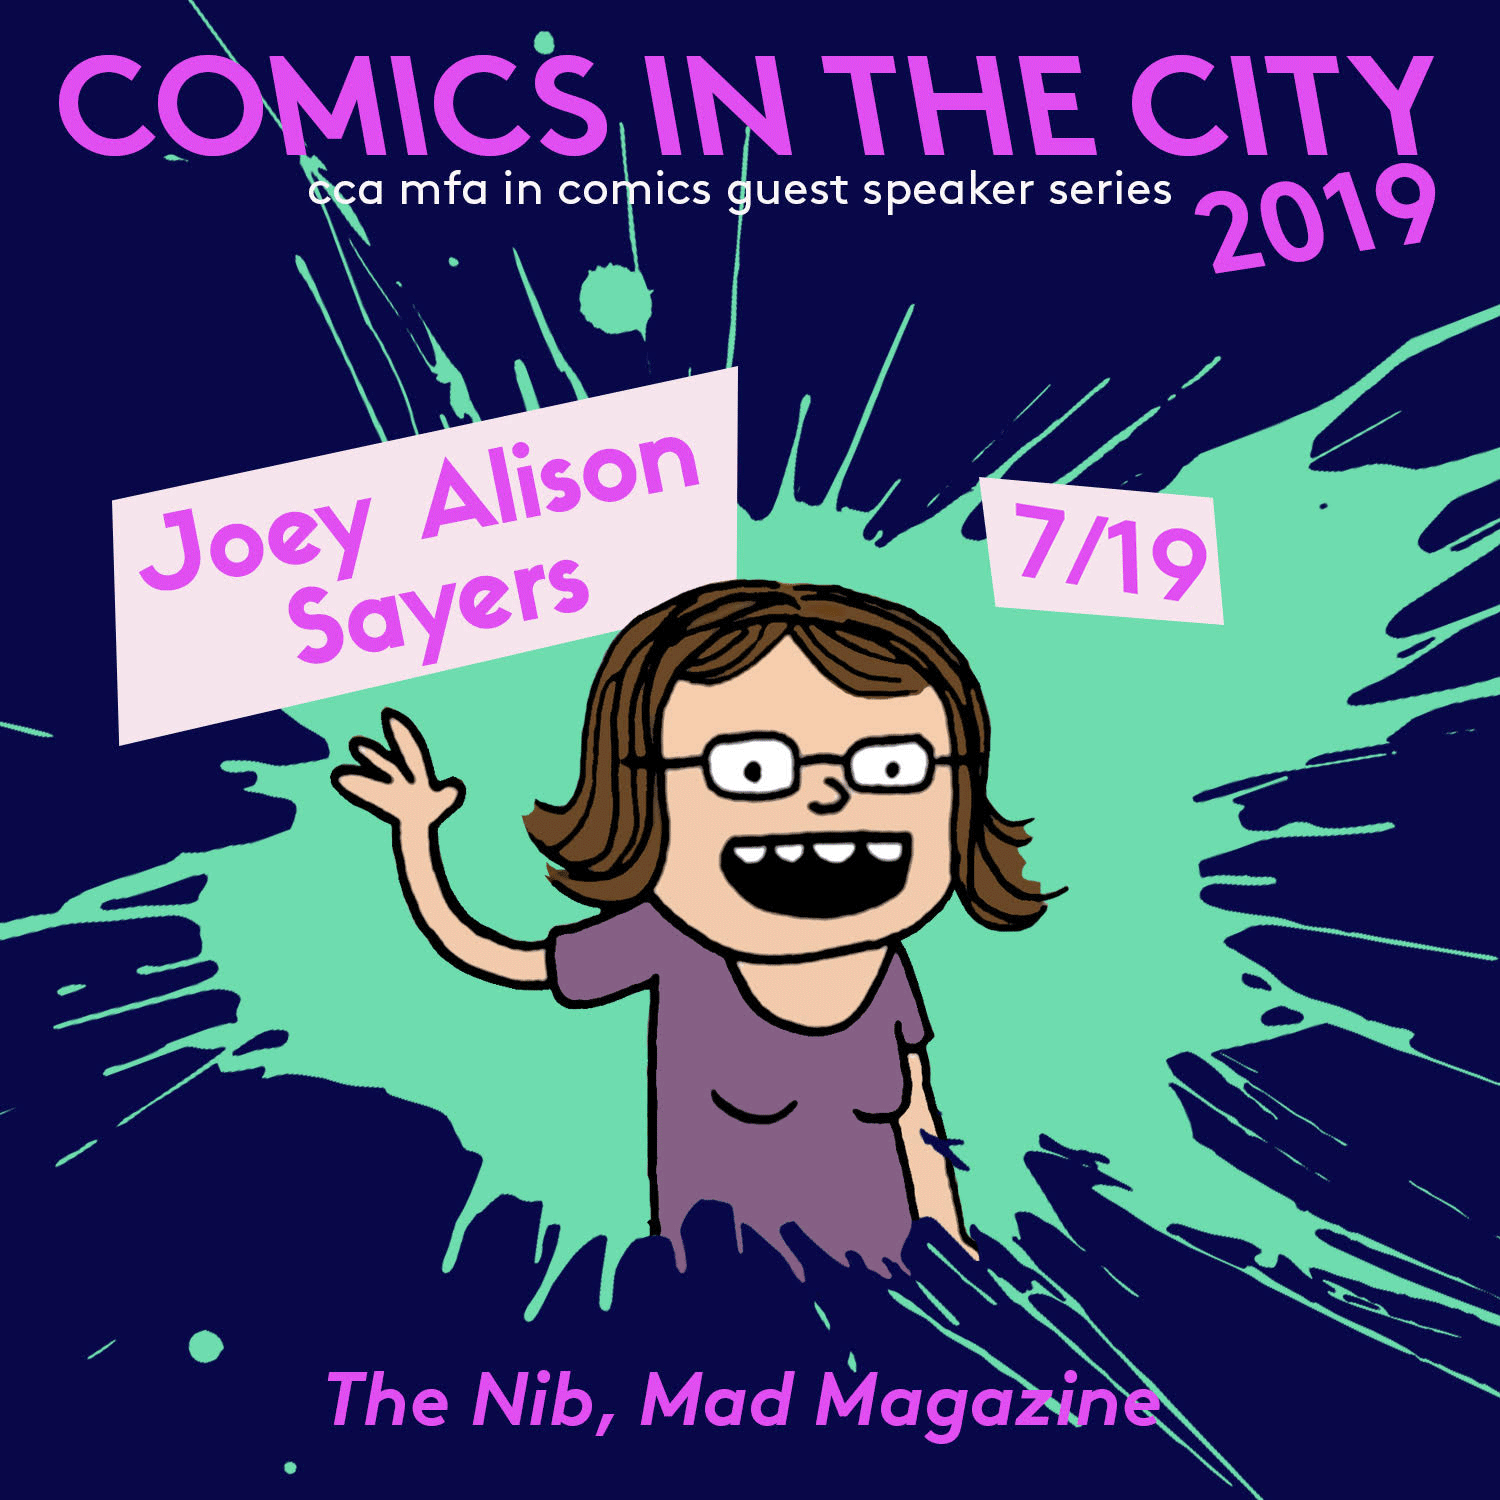 CITC2019 featuring Joey Alison Sayers Poster_Events_NP